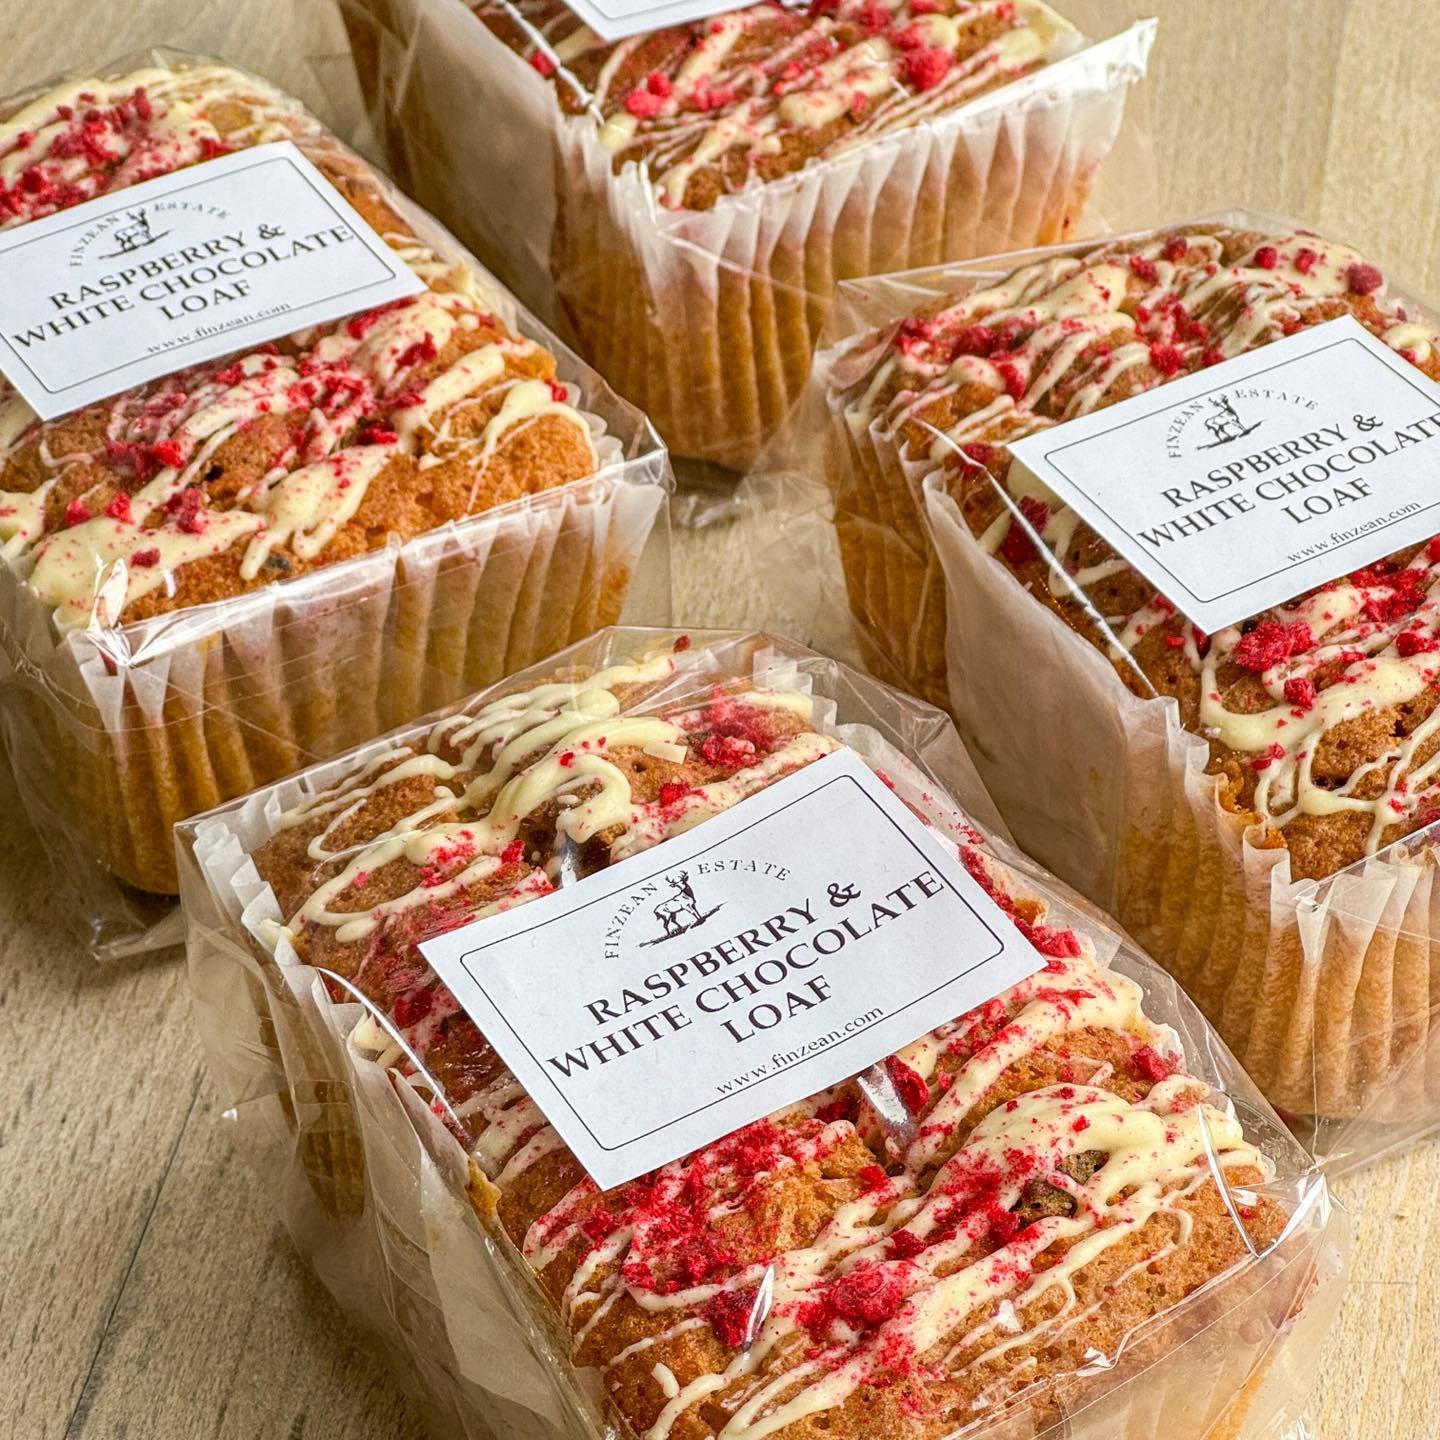 Fancy a takeaway treat? We have a few of our new Raspberry &amp; White Chocolate loaves left - pick one up before they&rsquo;re gone!